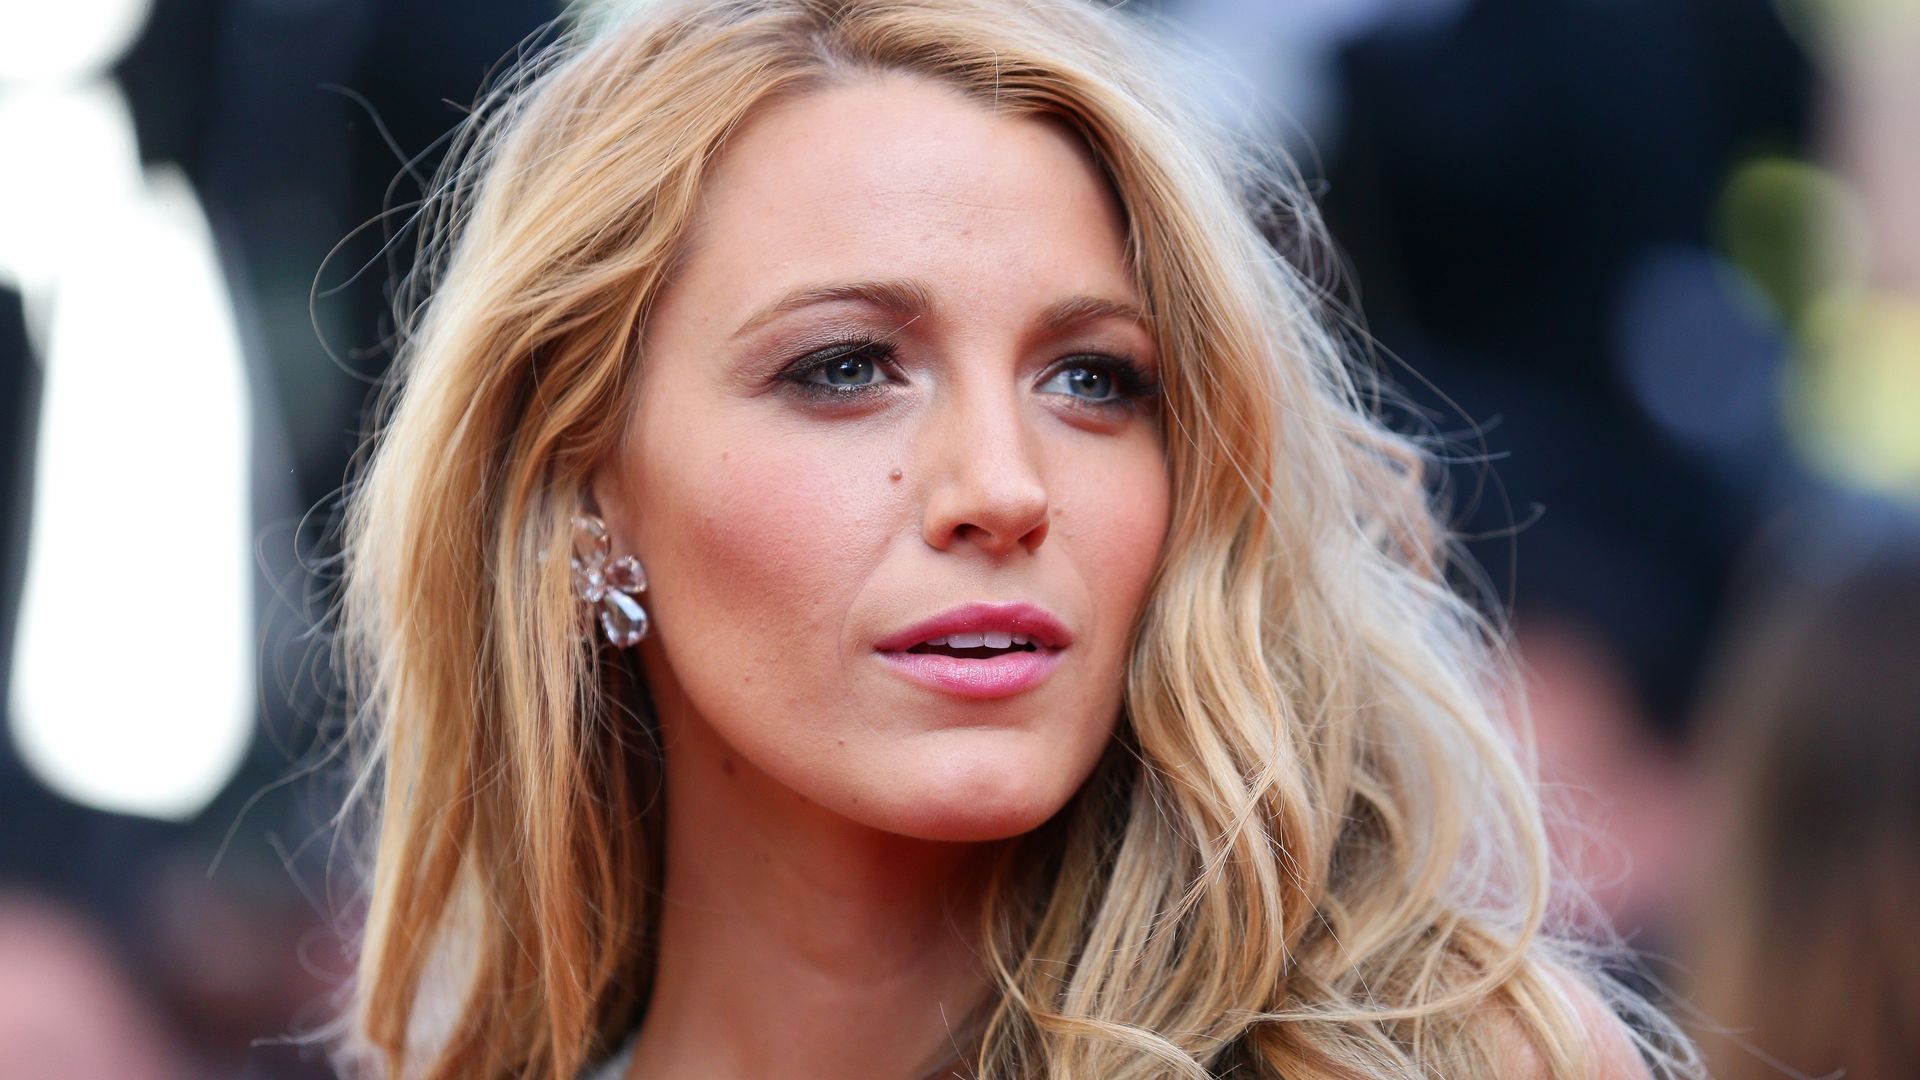 Blake Lively reportedly dated Ryan Gosling